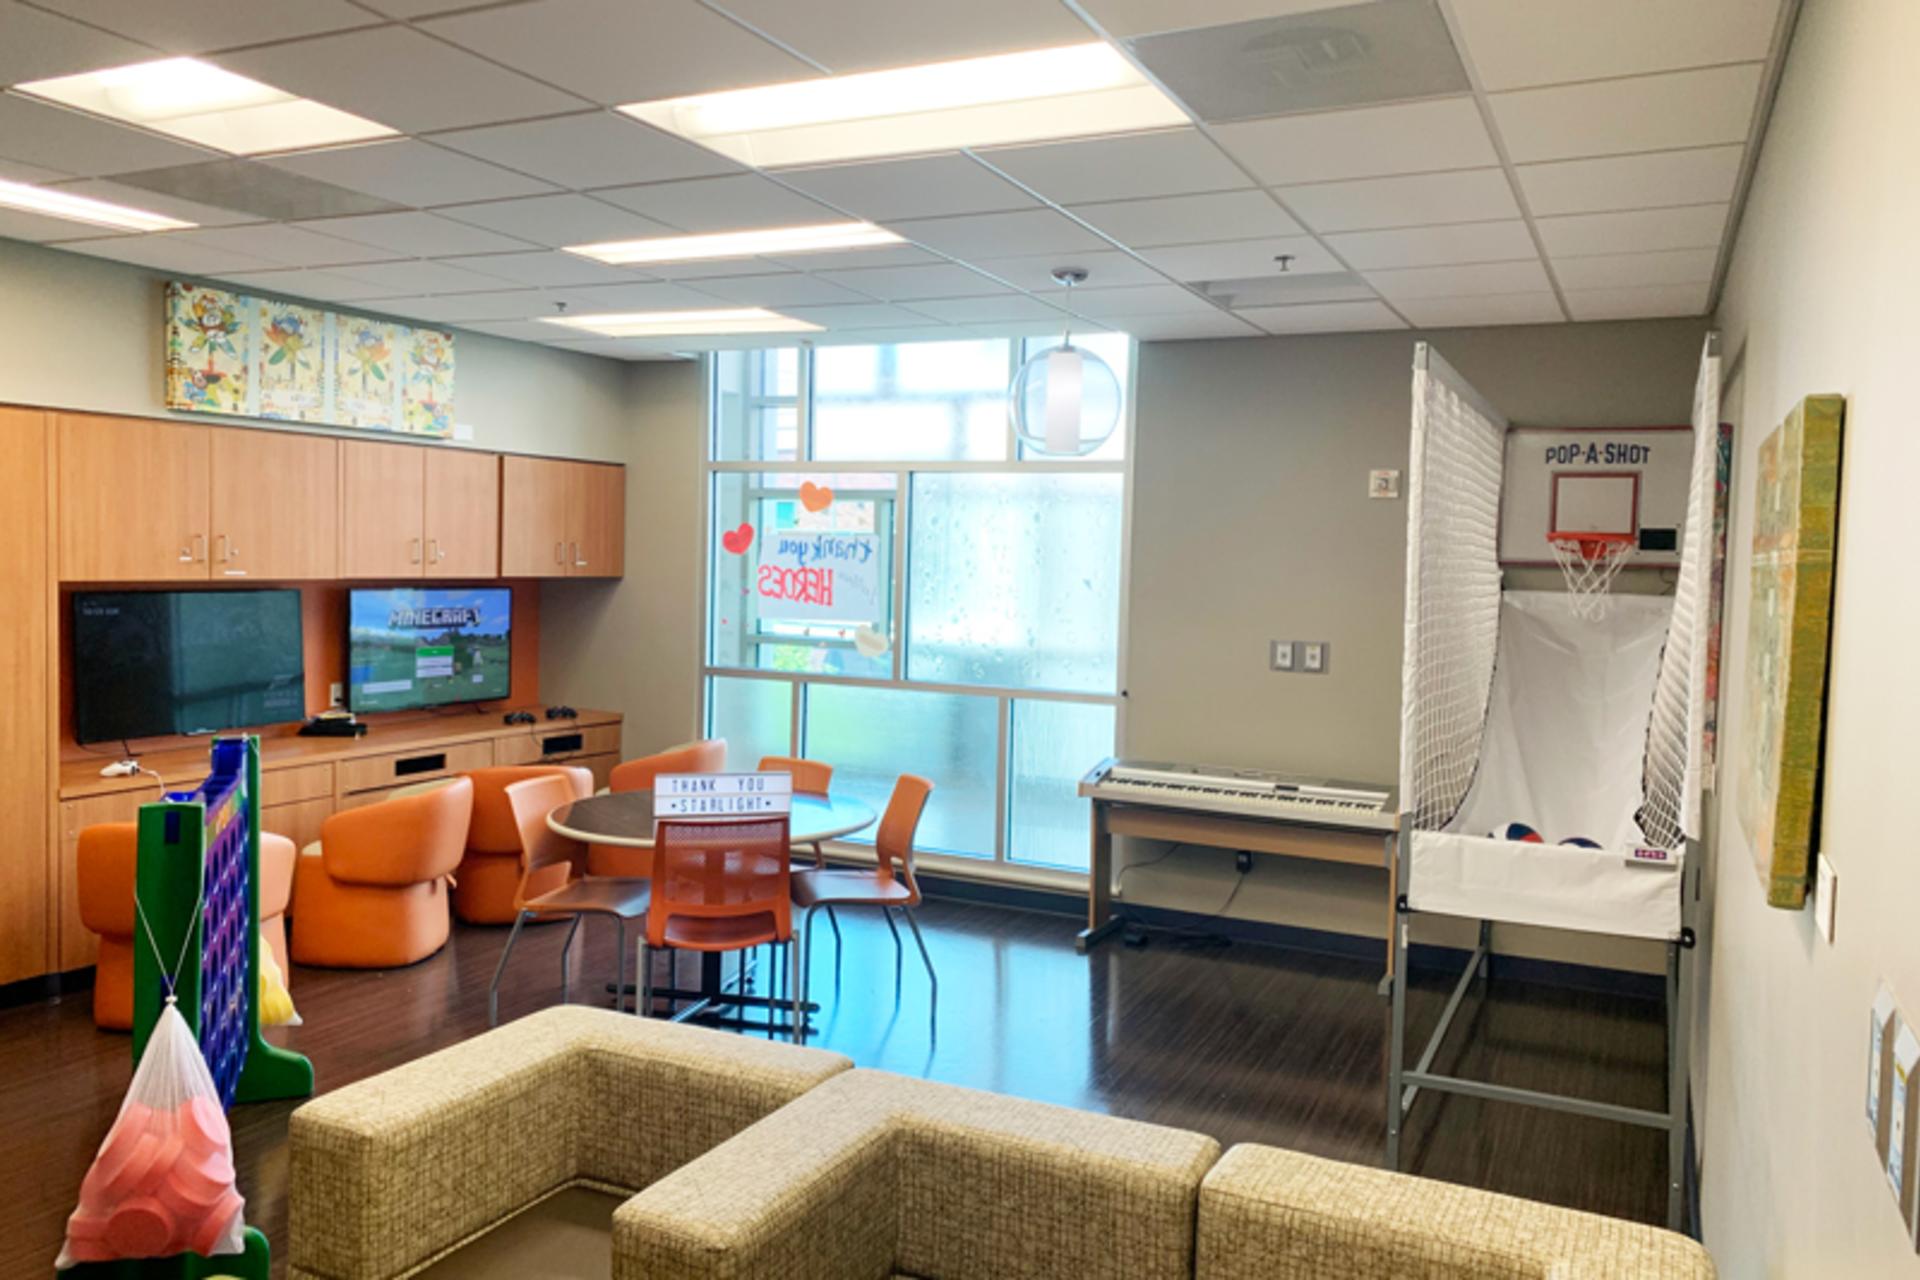 Updated Teen Room at Dell Children's Medical Center with basketball hoop game, couches, T.V.s and computers